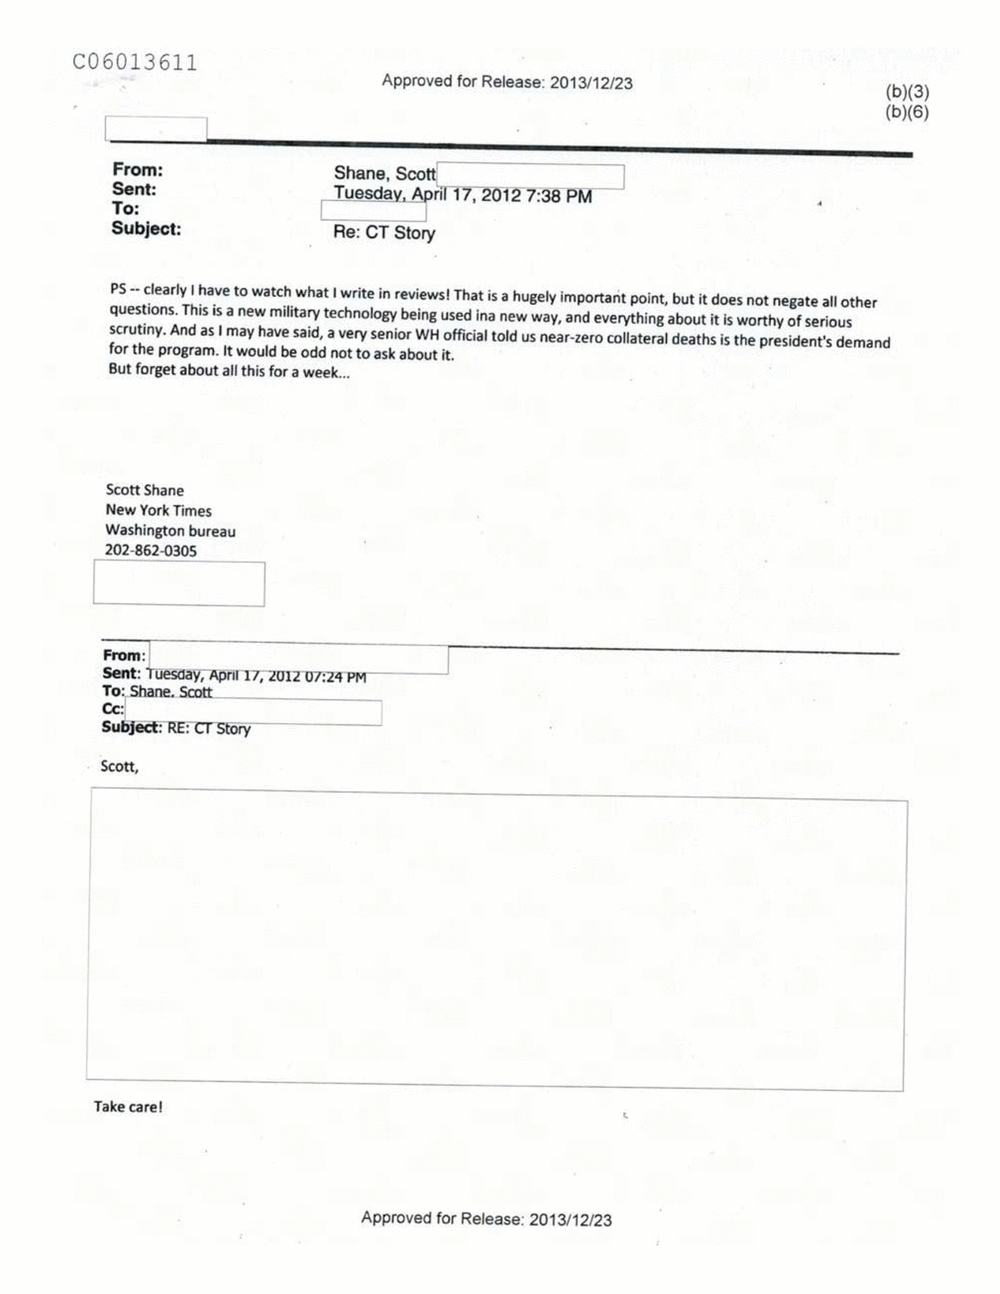 Page 427 from Email Correspondence Between Reporters and CIA Flacks